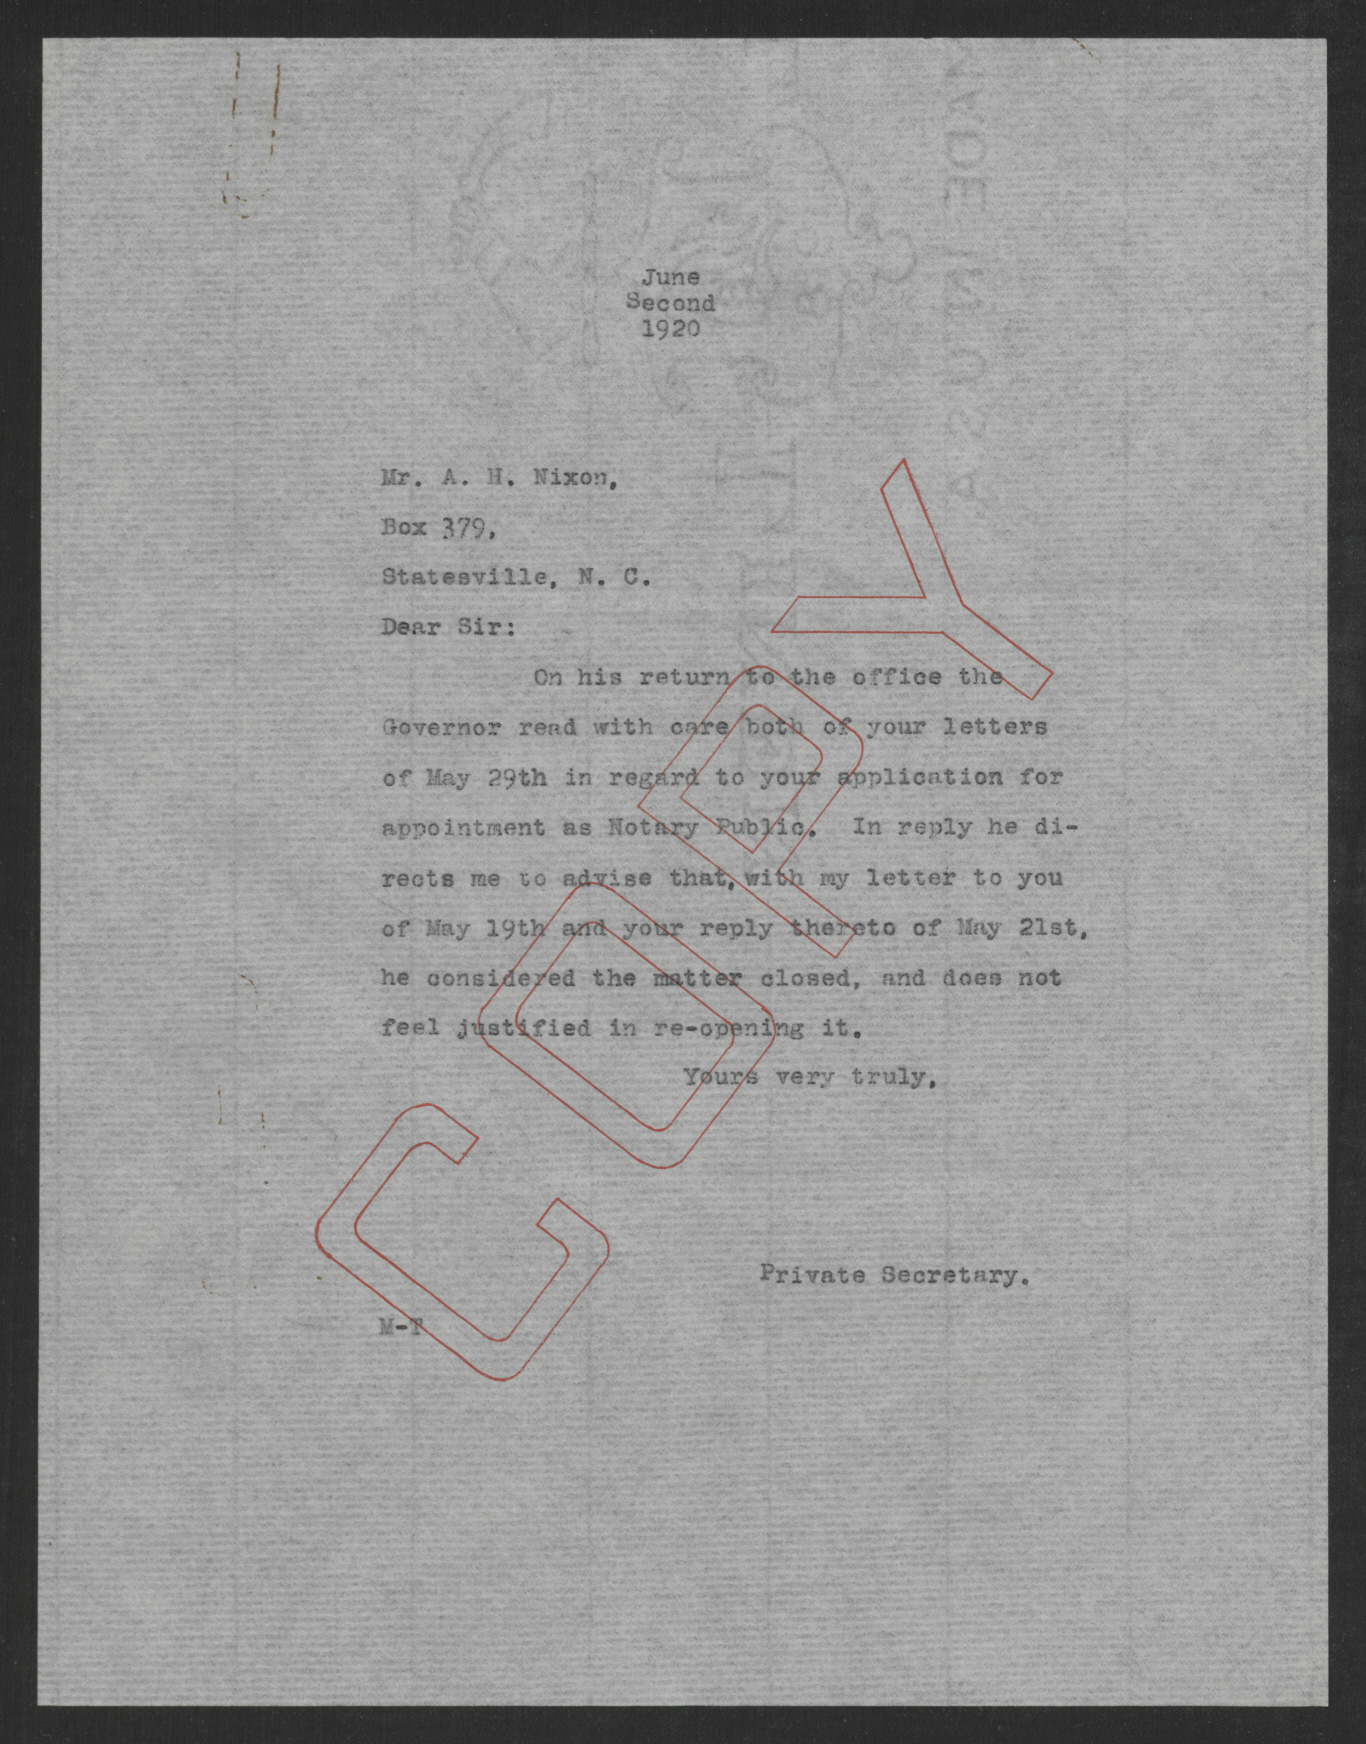 Letter from Santford Martin to A. H. Nixon, June 2, 1920